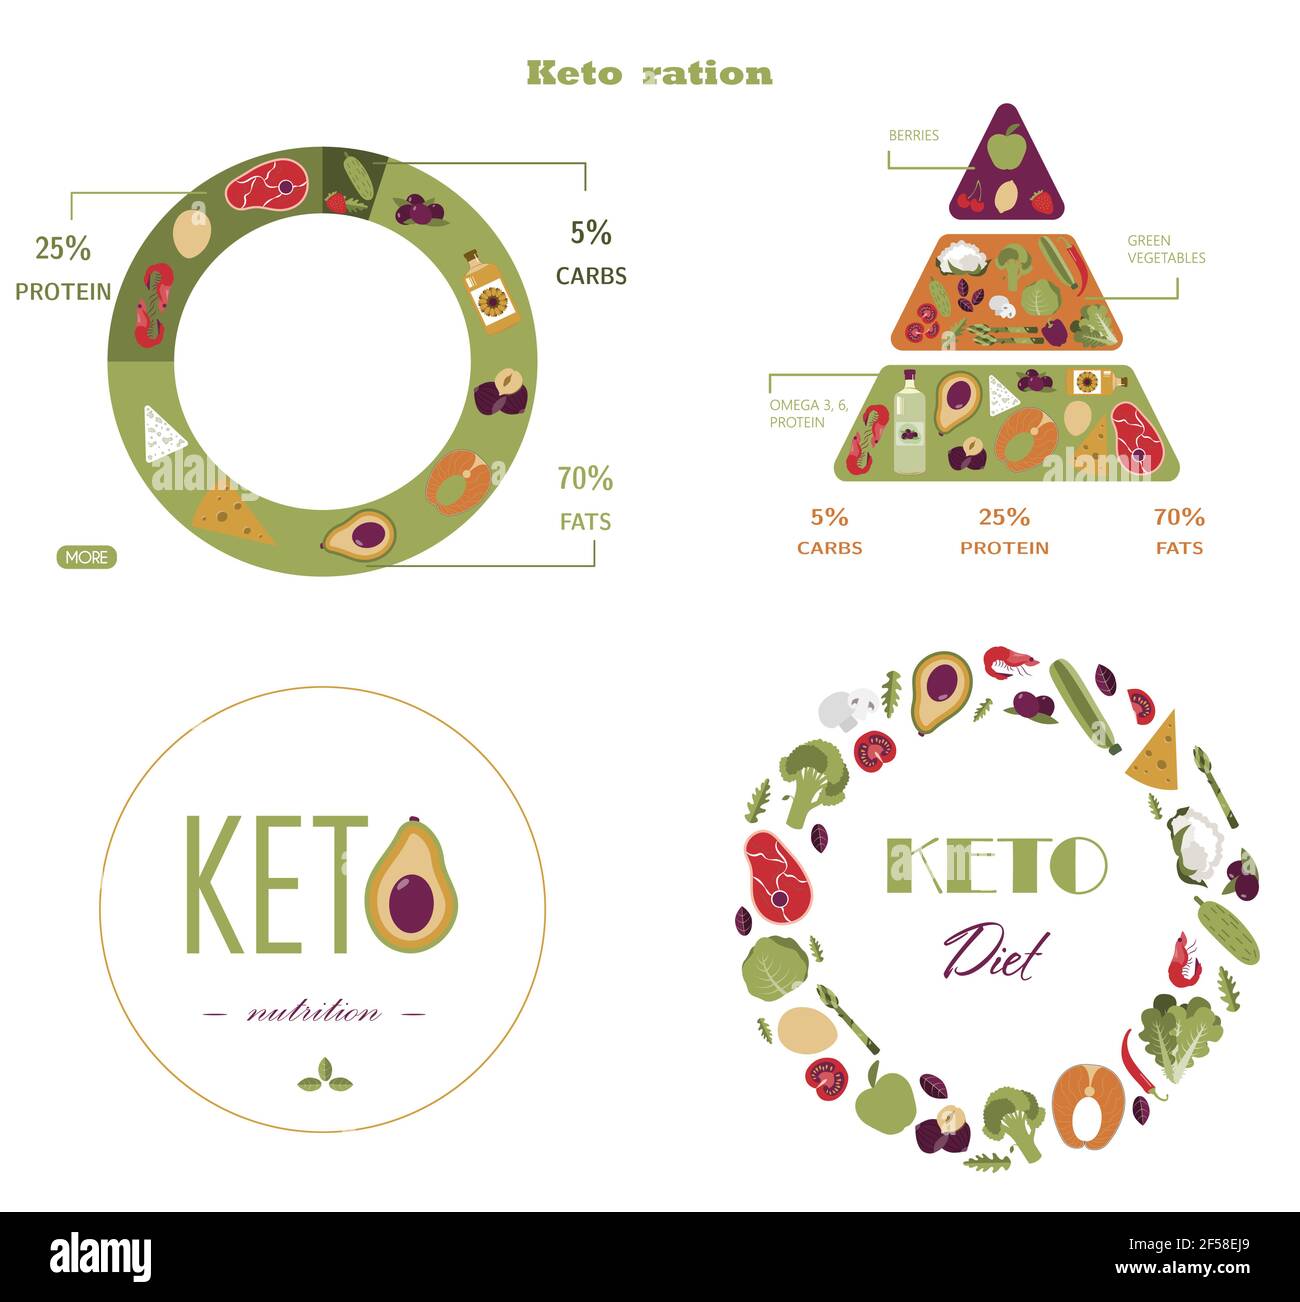 Vector pyramid of nutrition on the keto diet. Foods, calculation of water, beverages, fat, protein and carbohydrates for a healthy diet according to Stock Vector